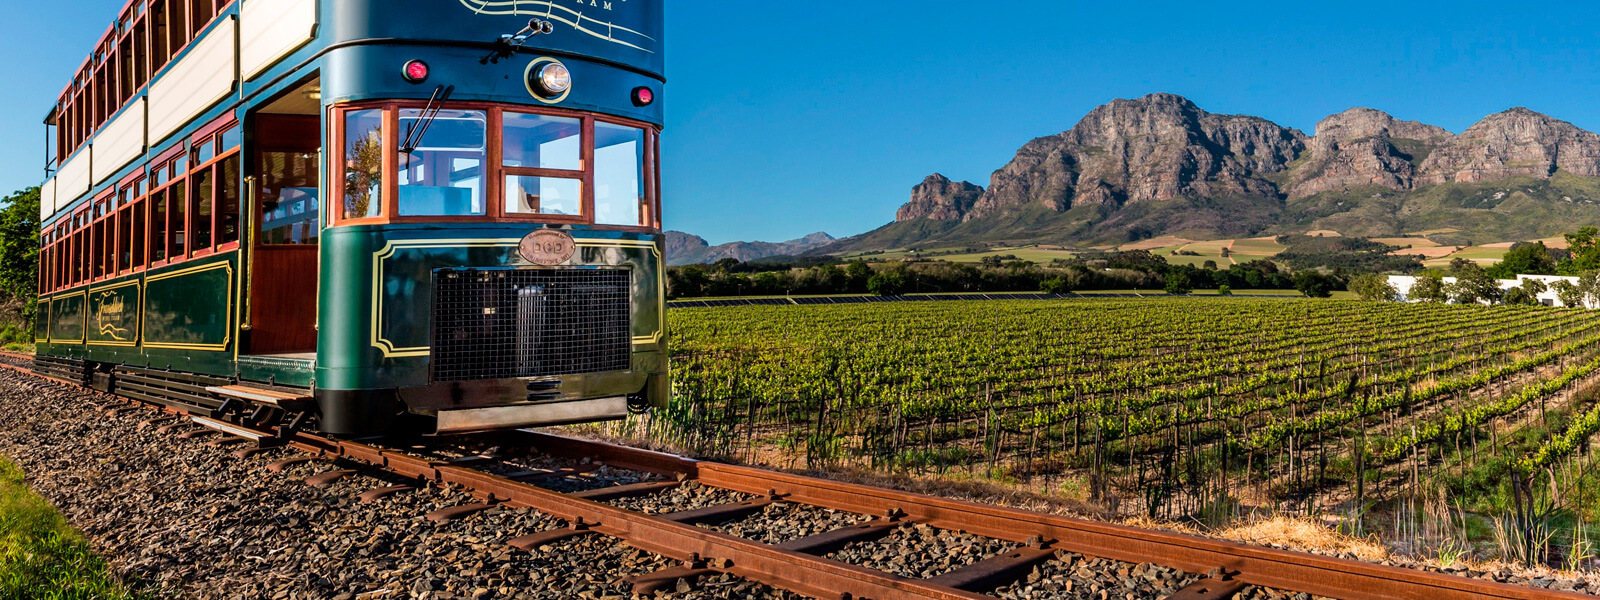 Cape Town - Cape Winelands | South Africa